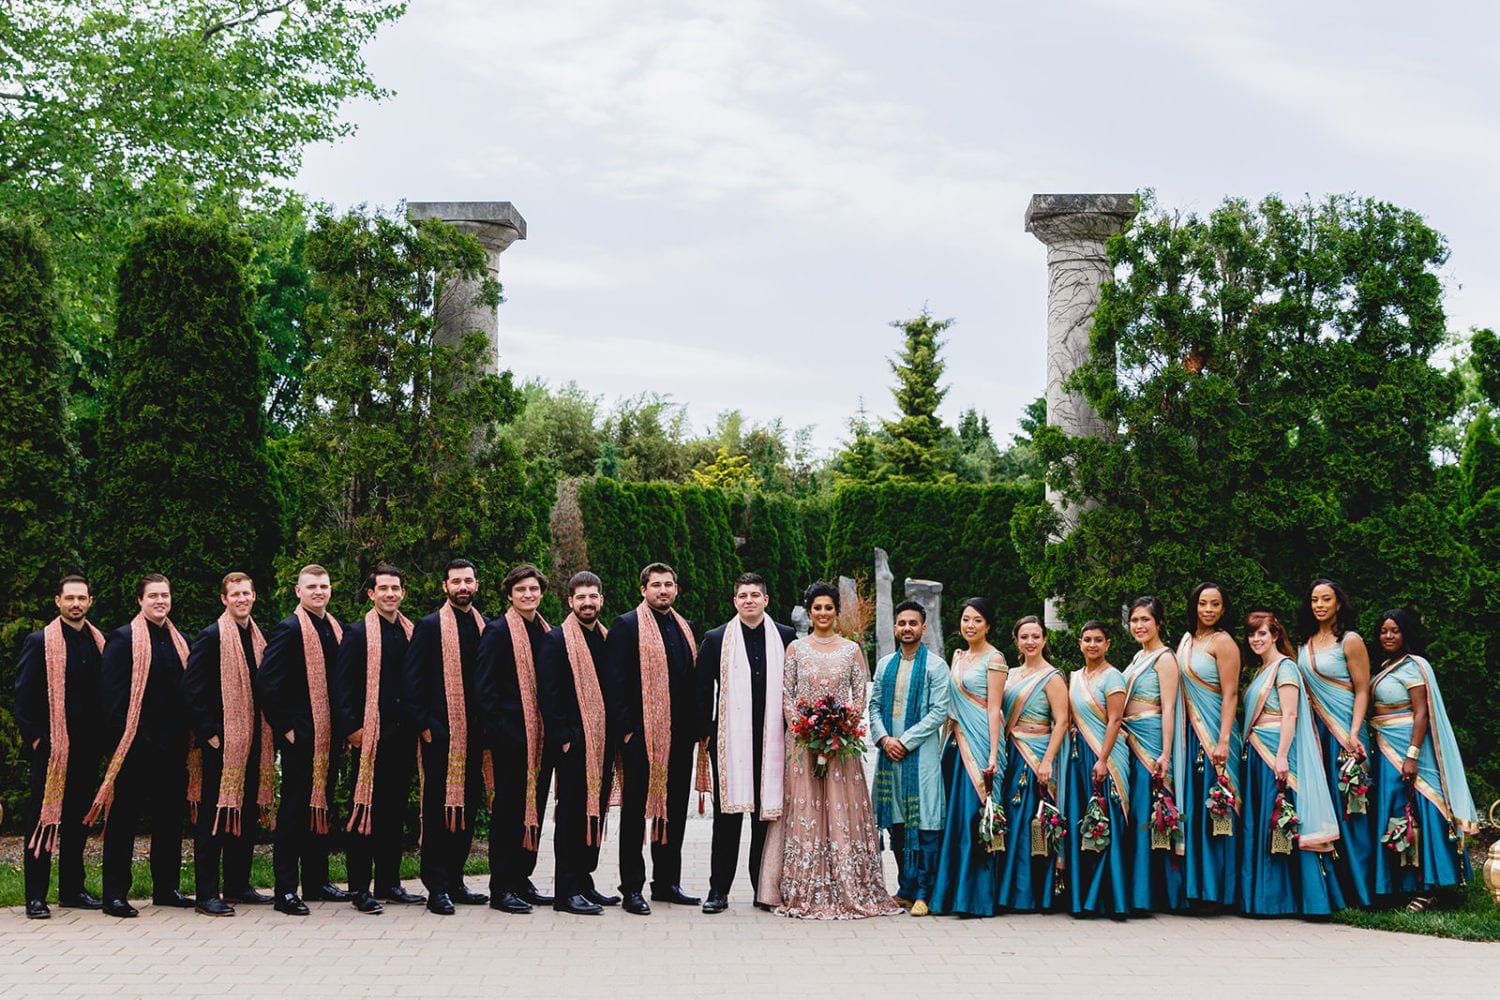 A wedding bridal party picture at the Grounds for Sculpture in New Jersey